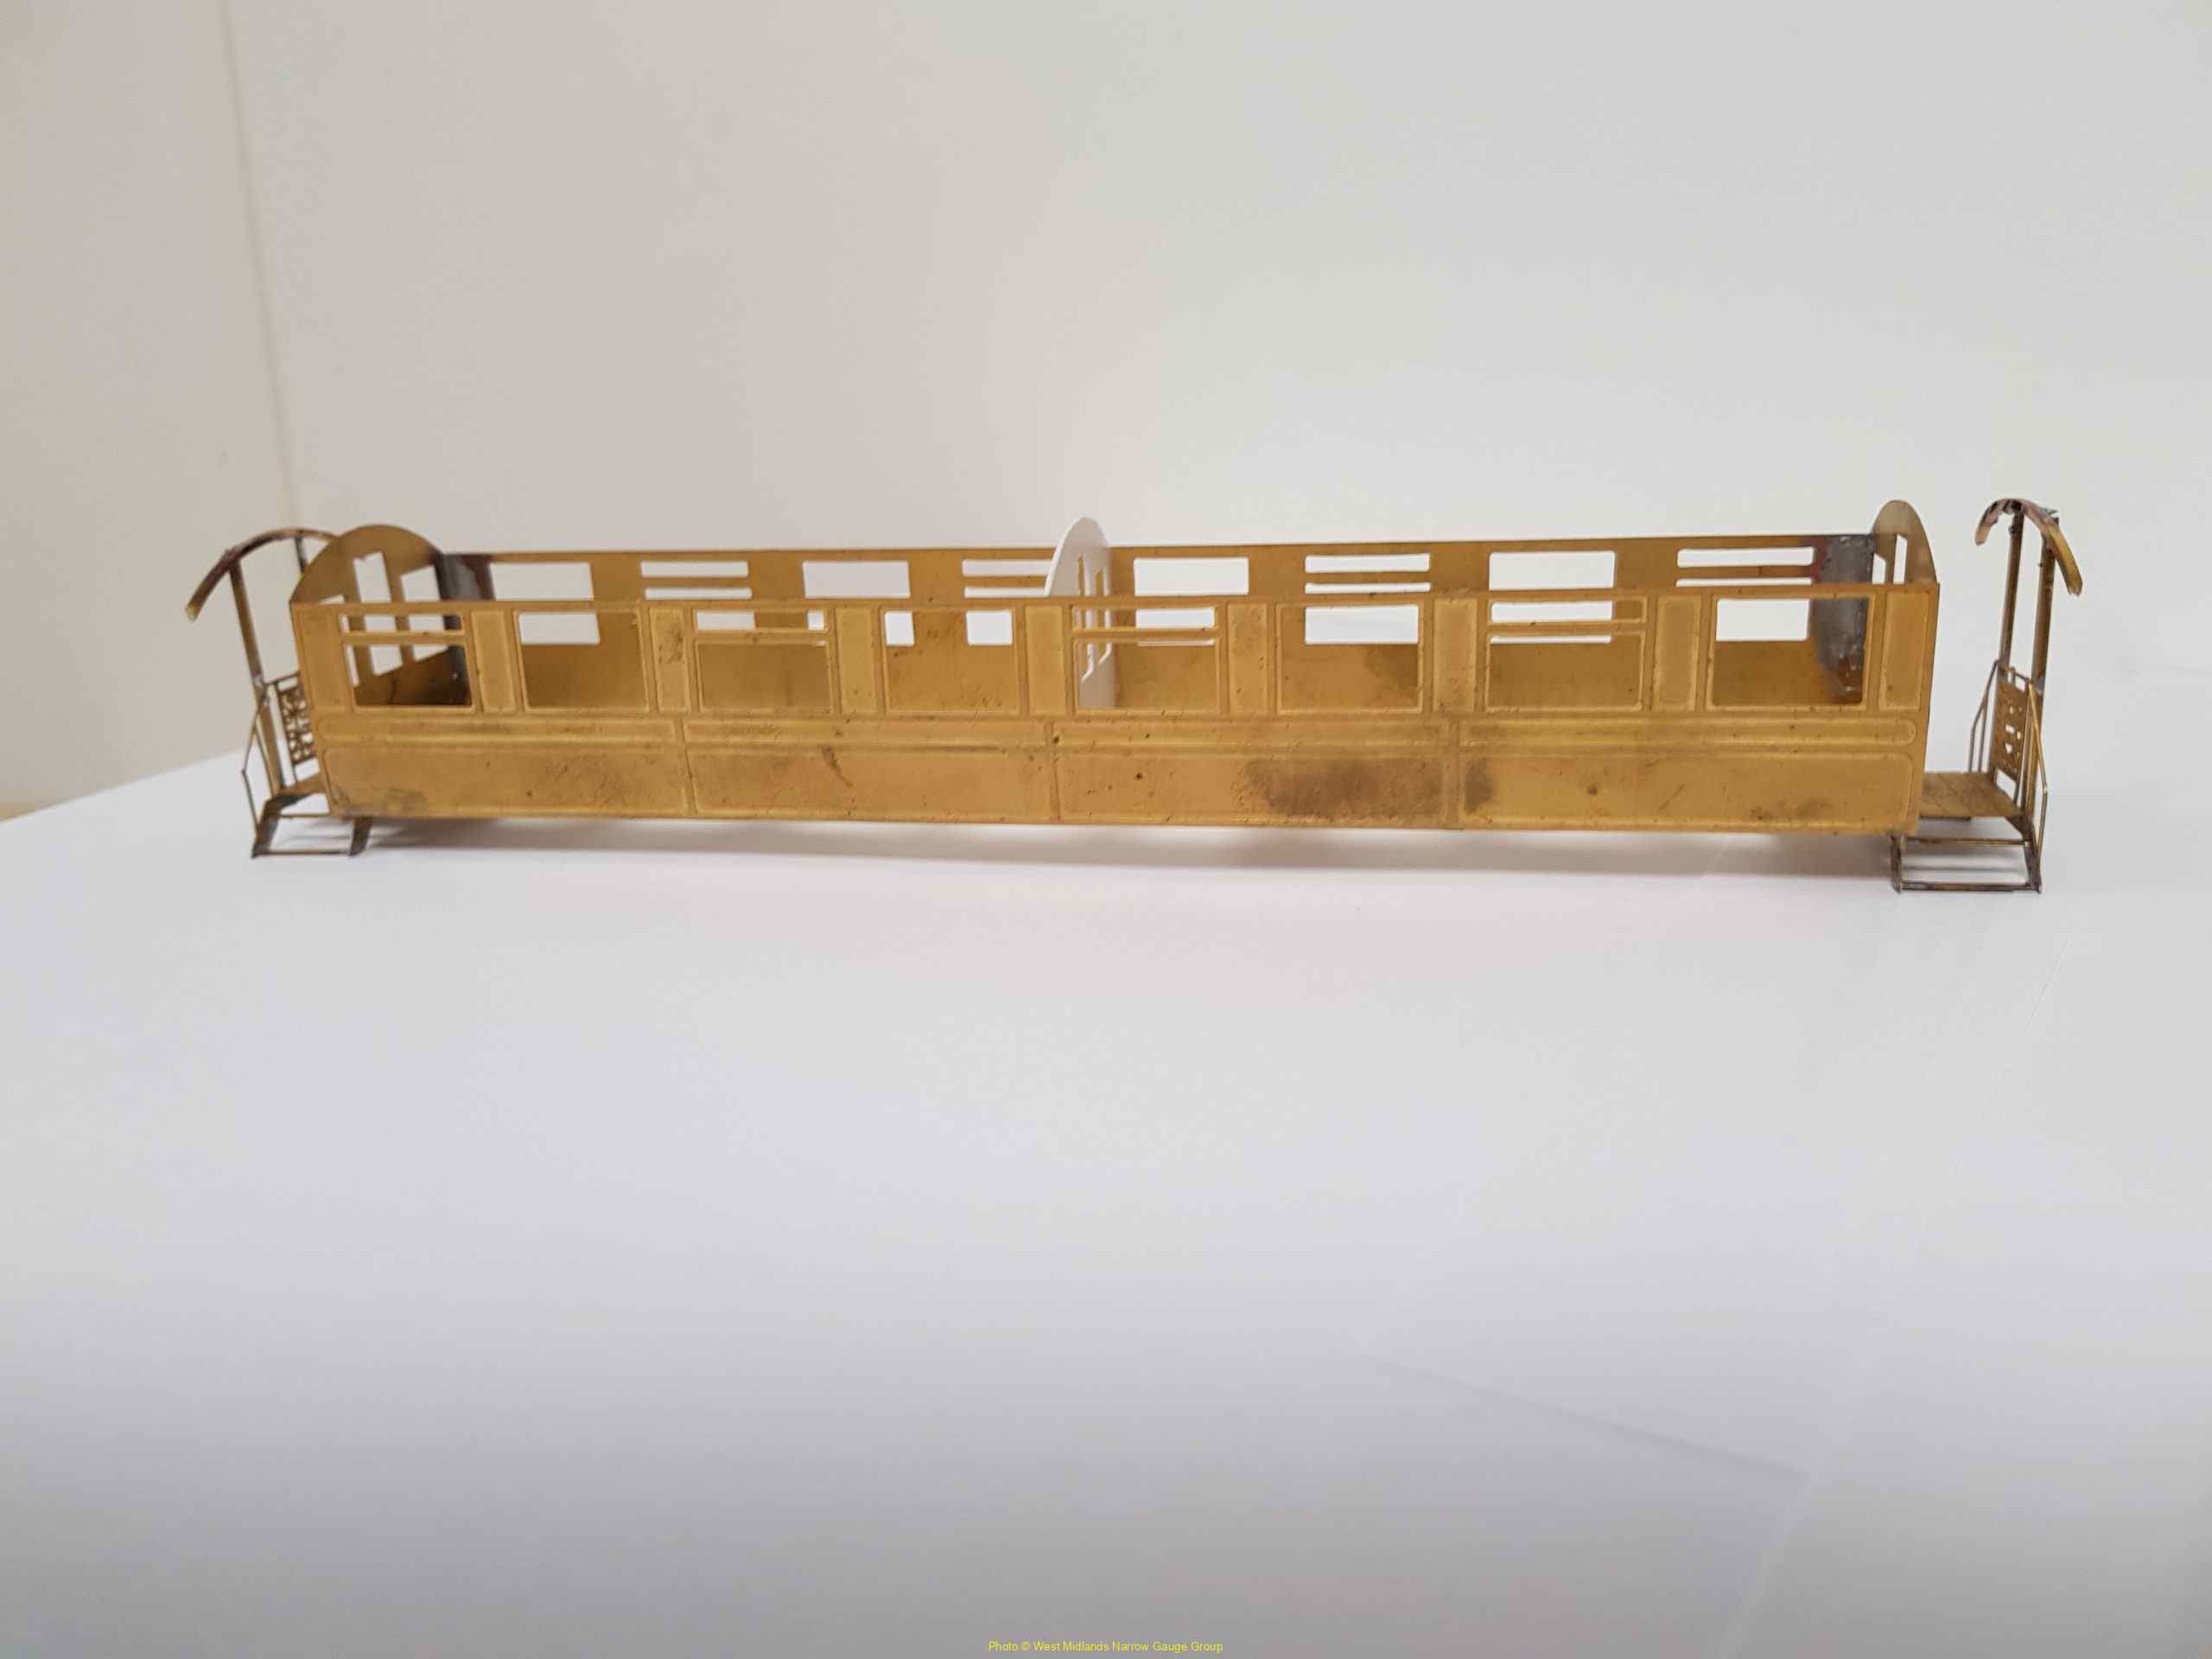 One of Charlie Forbes' coaches made from Worsley Works etches for Campbelltown & Macrihanish stock.  Image © Charlie Forbes